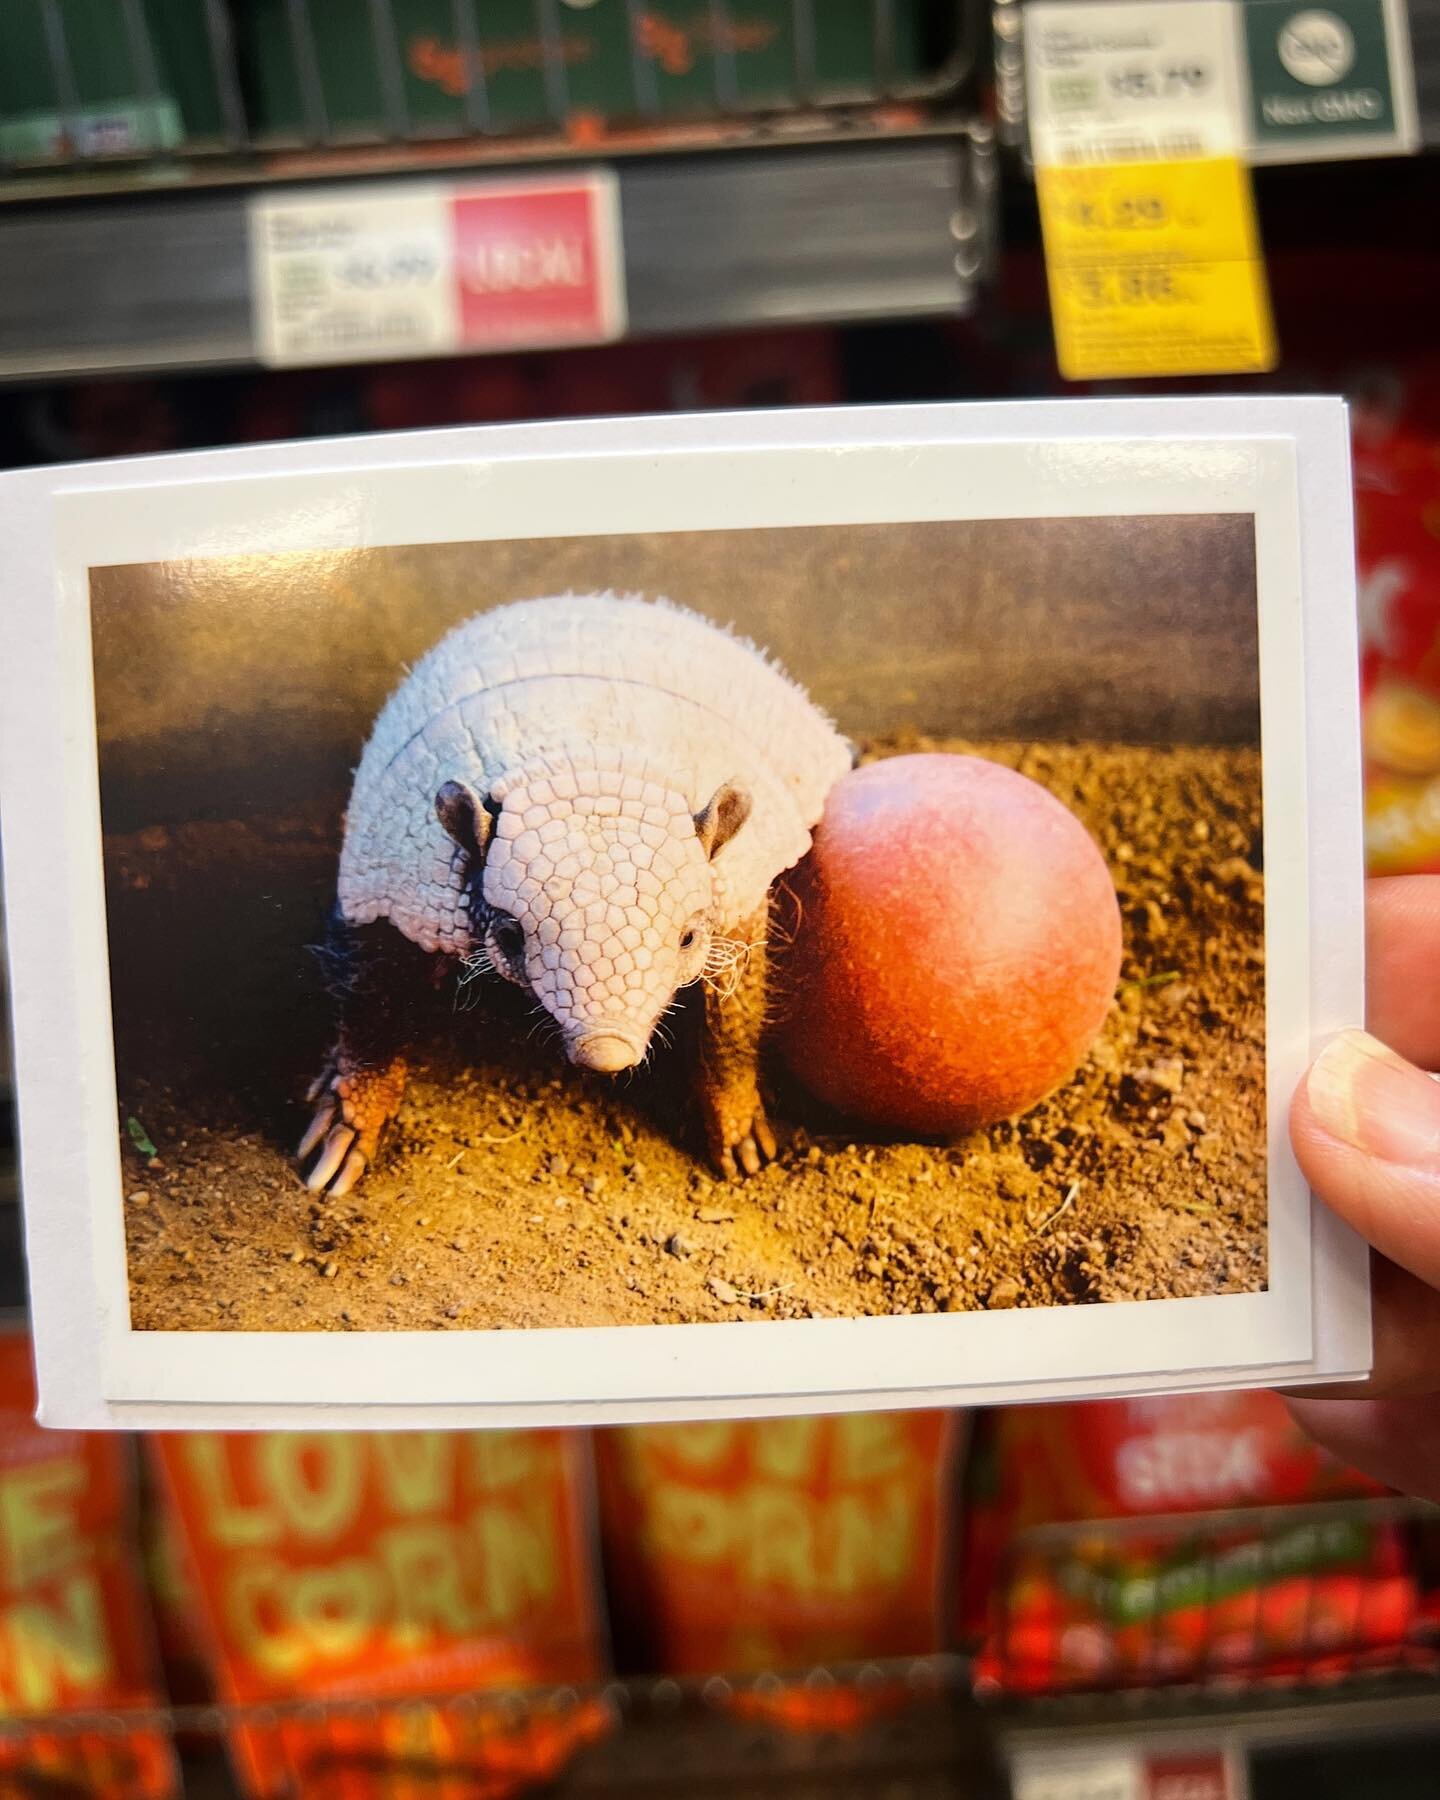 &ldquo;Find something to love as much as this armadillo loves his ball&rdquo;

I met Frank at @animaltracksinc sanctuary. I didn&rsquo;t know I could fall in love with an armadillo. To watch him play with his beloved red ball was pure joy. His joy re